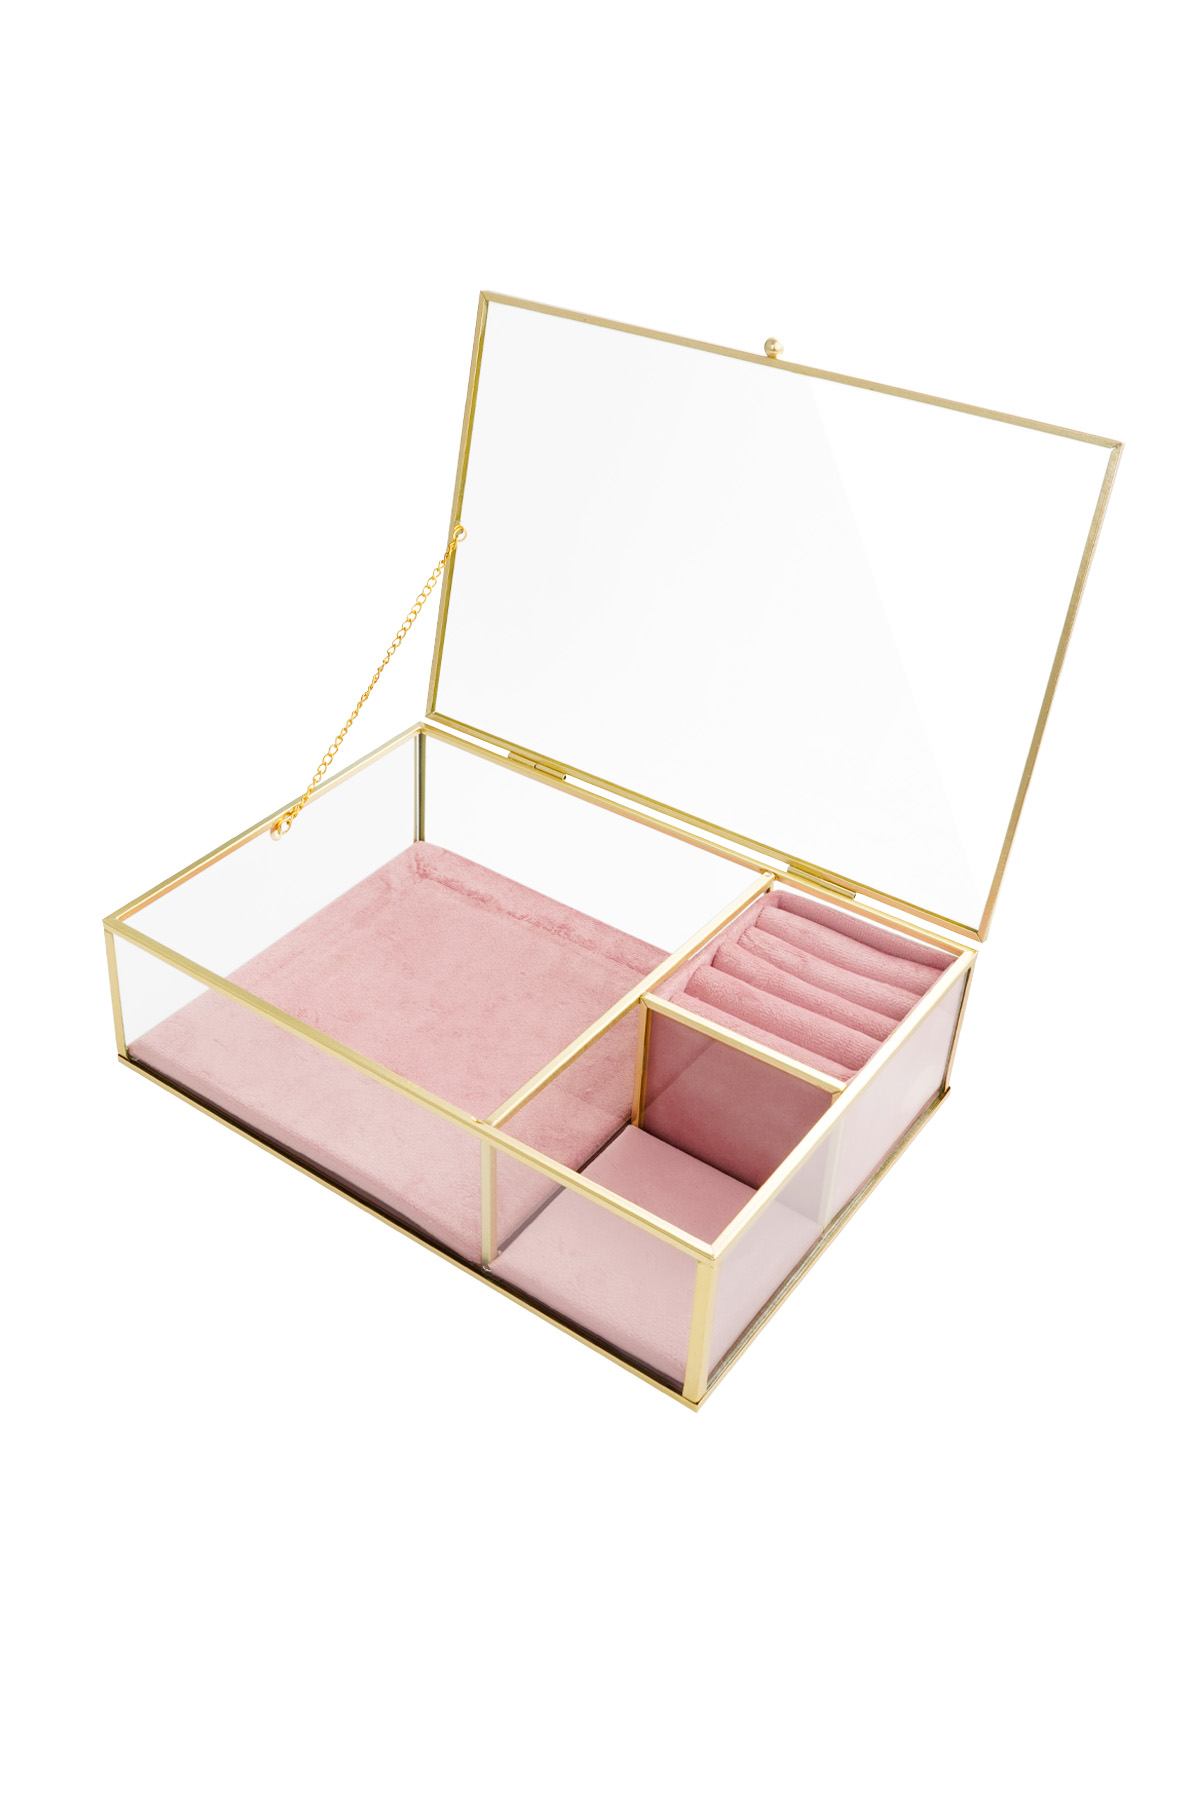 Glass three-compartment display - pink